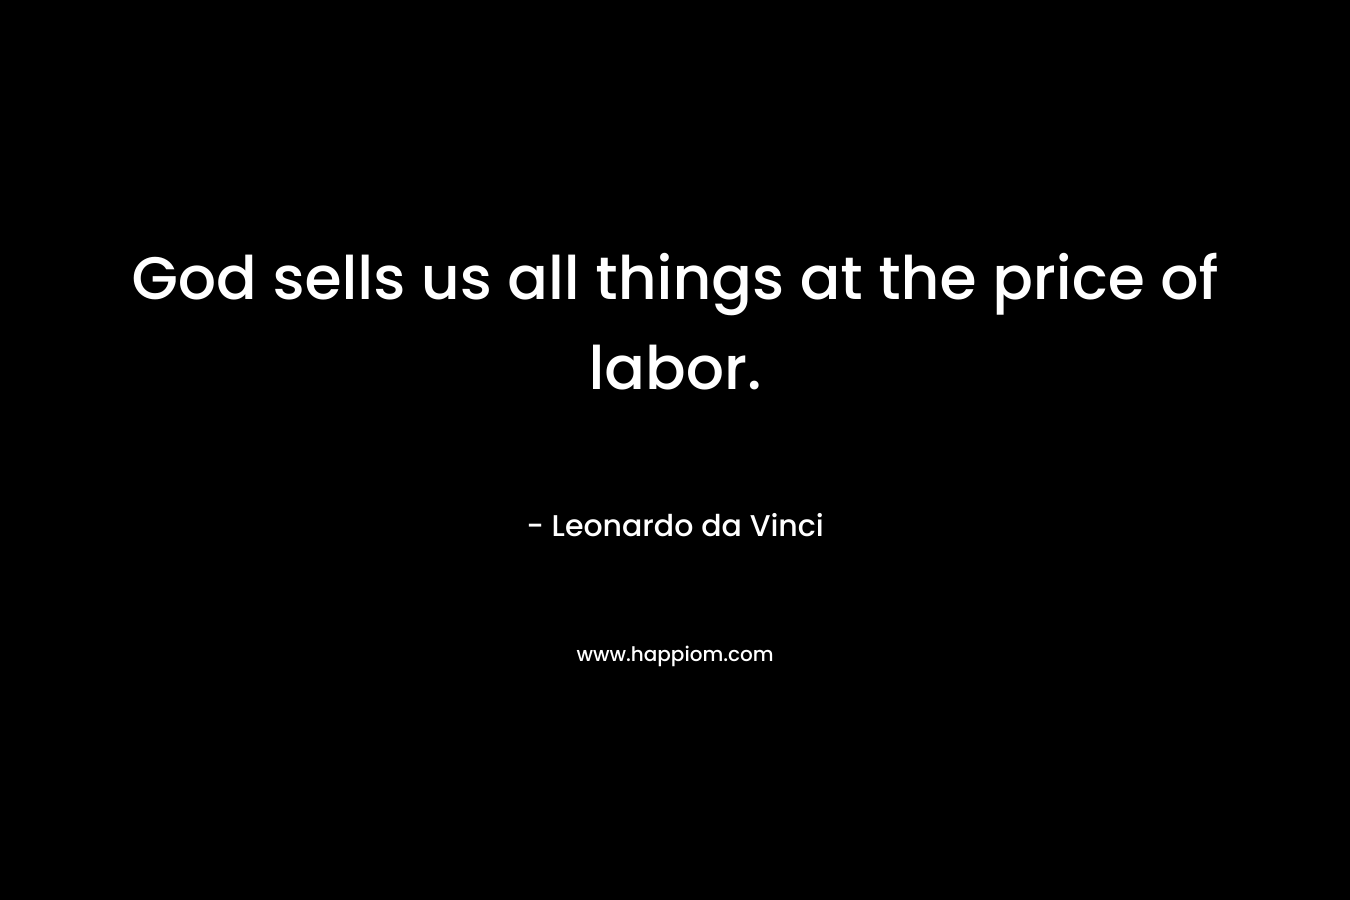 God sells us all things at the price of labor.